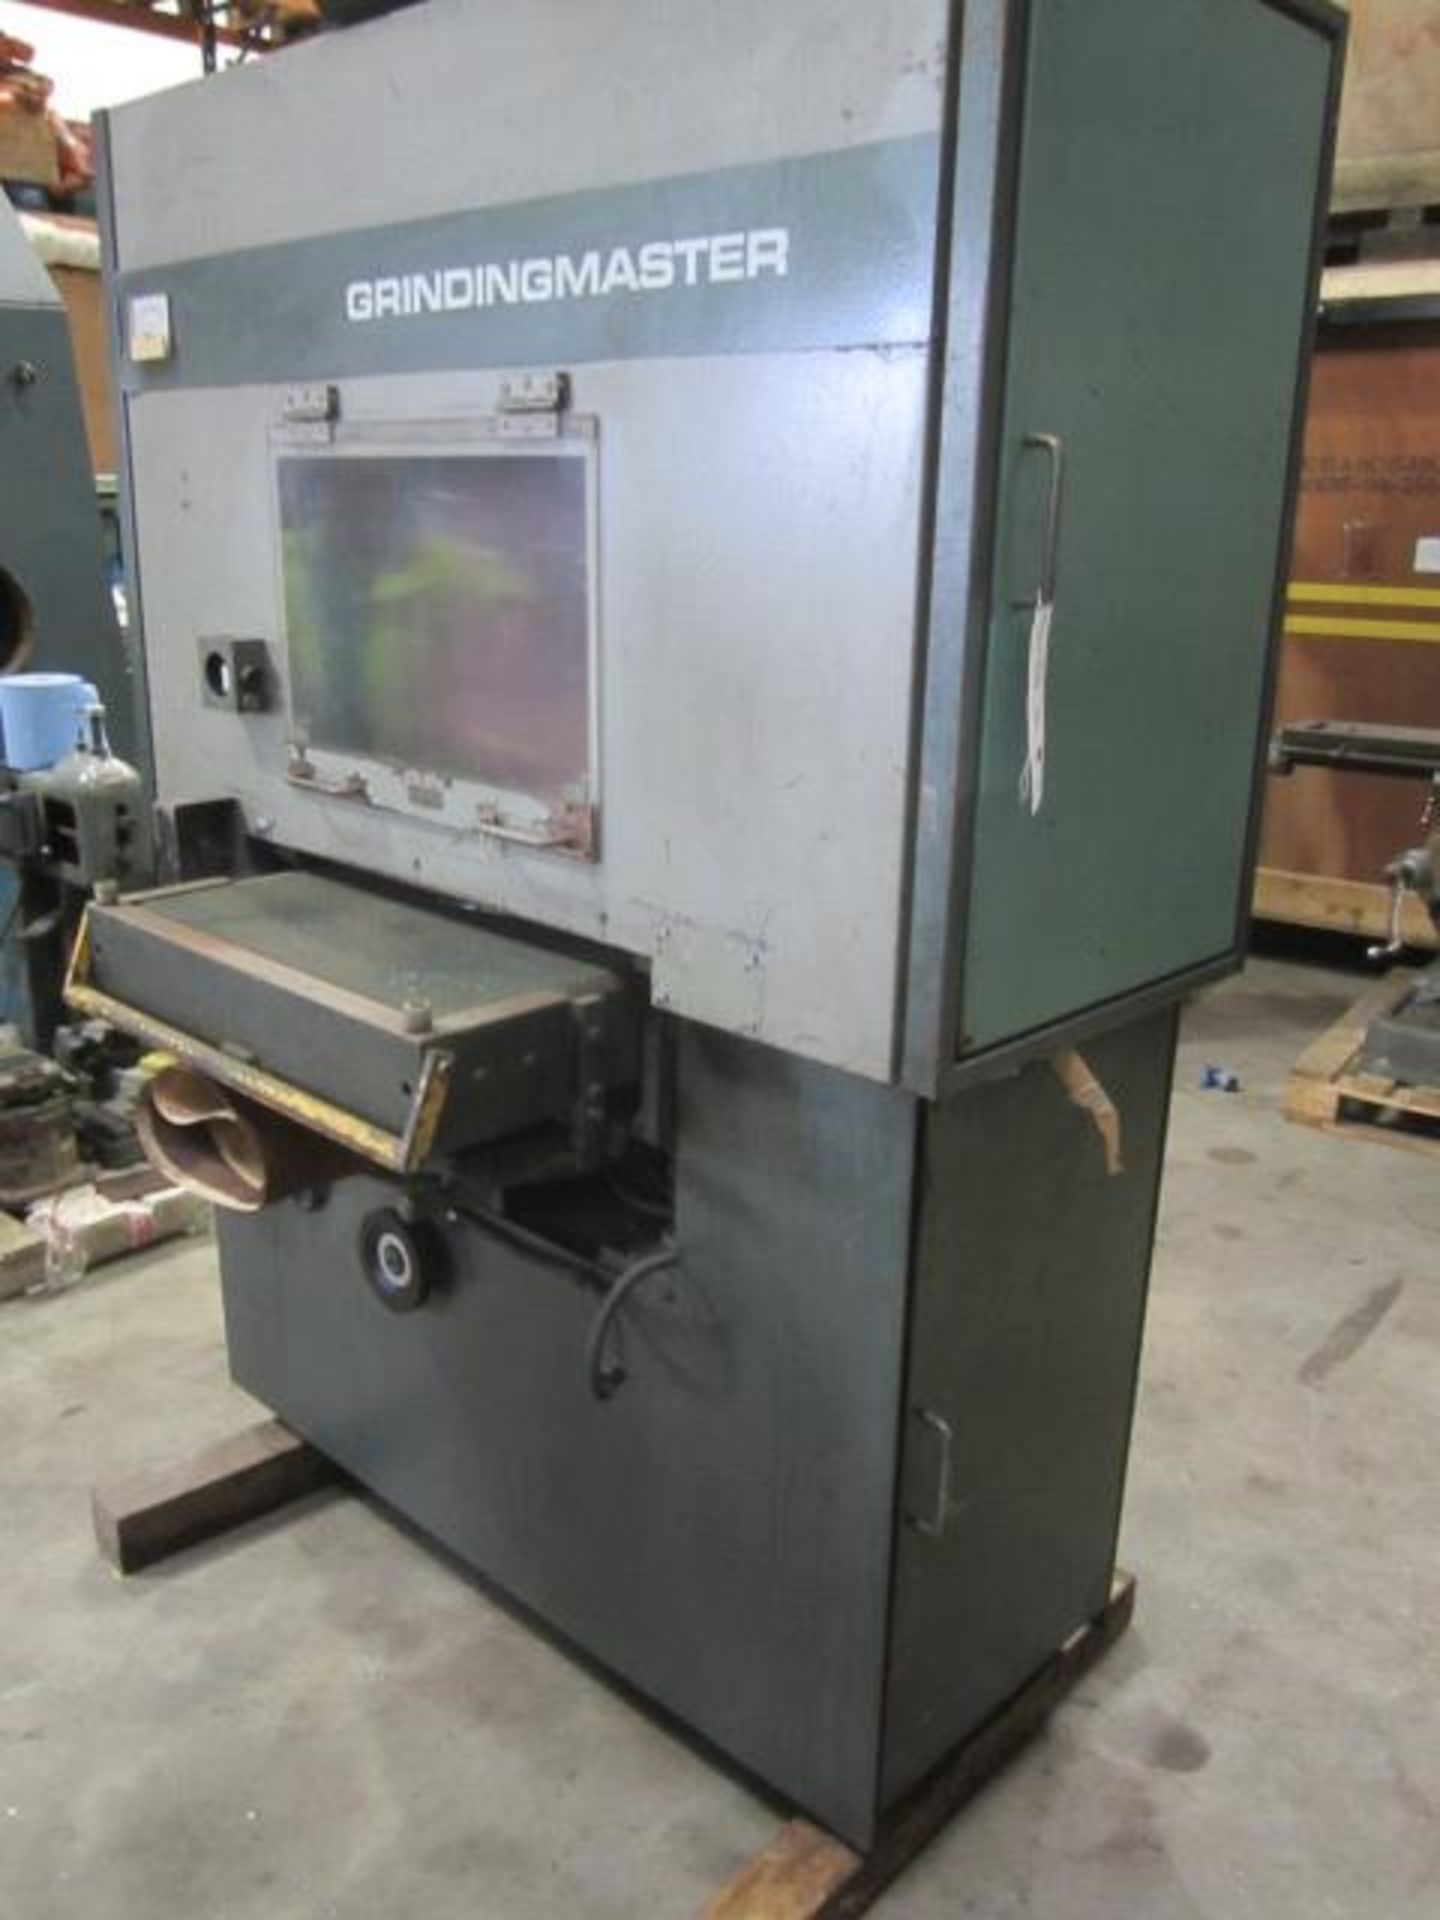 Grinding Master 600mm through feed belt sander, type MCSB-600, serial no. R15103 - for spares or - Image 2 of 7